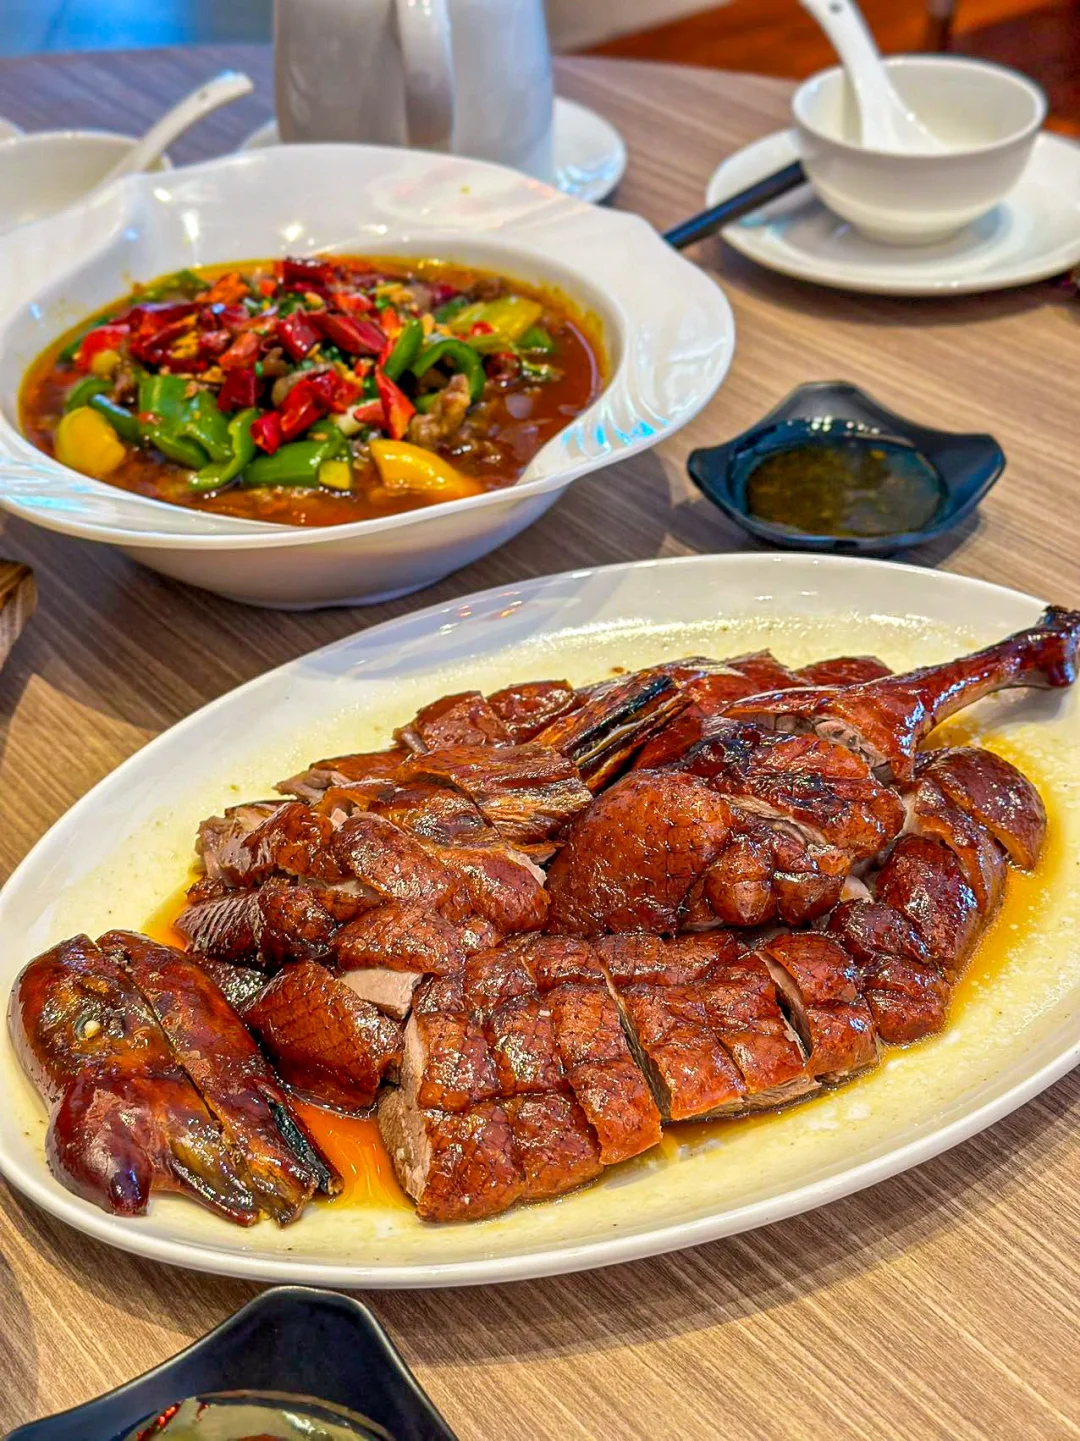 Macao-Sham Tseng Chan Kee Roast Goose, a Hong Kong time-honored brand with 75 years of history